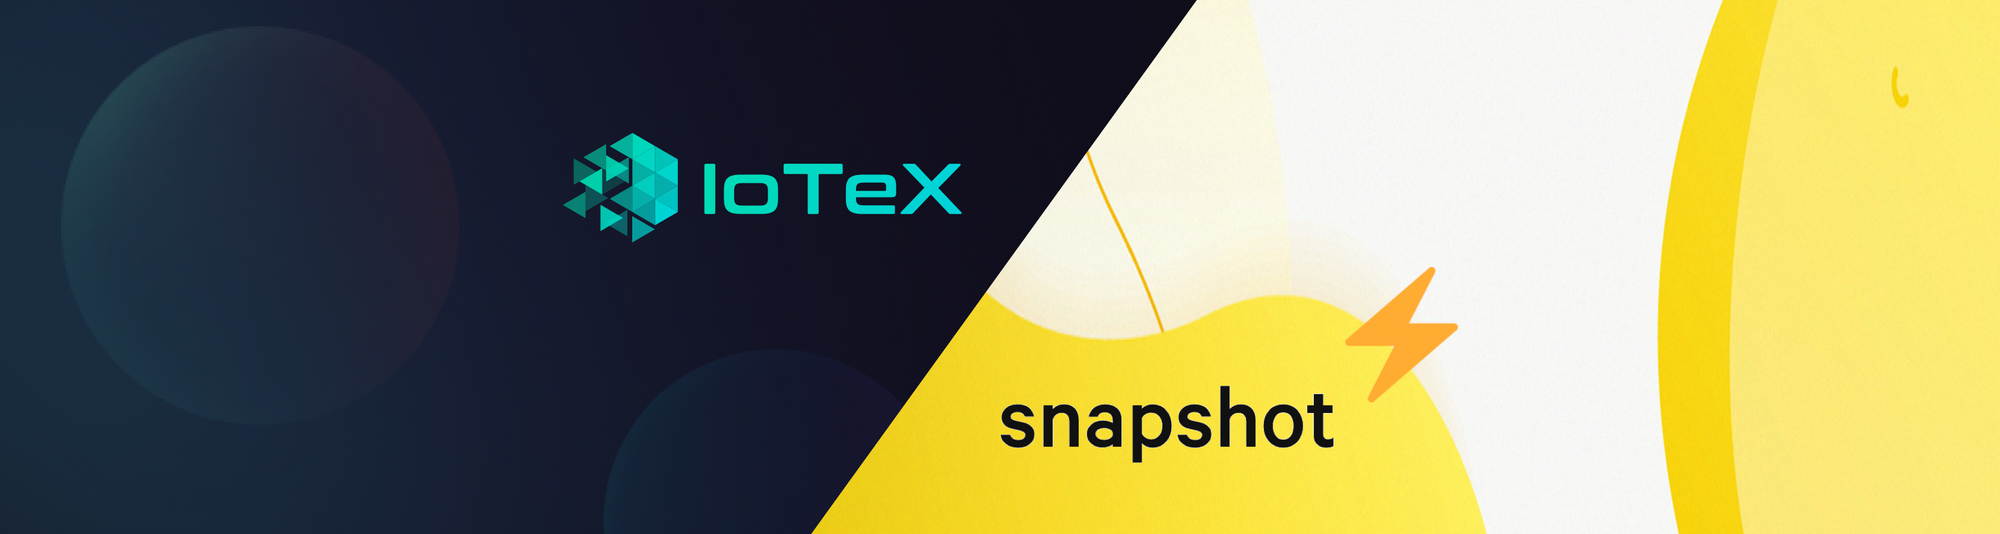 IoTeX & Snapshot: Decentralized Governance with No Fees